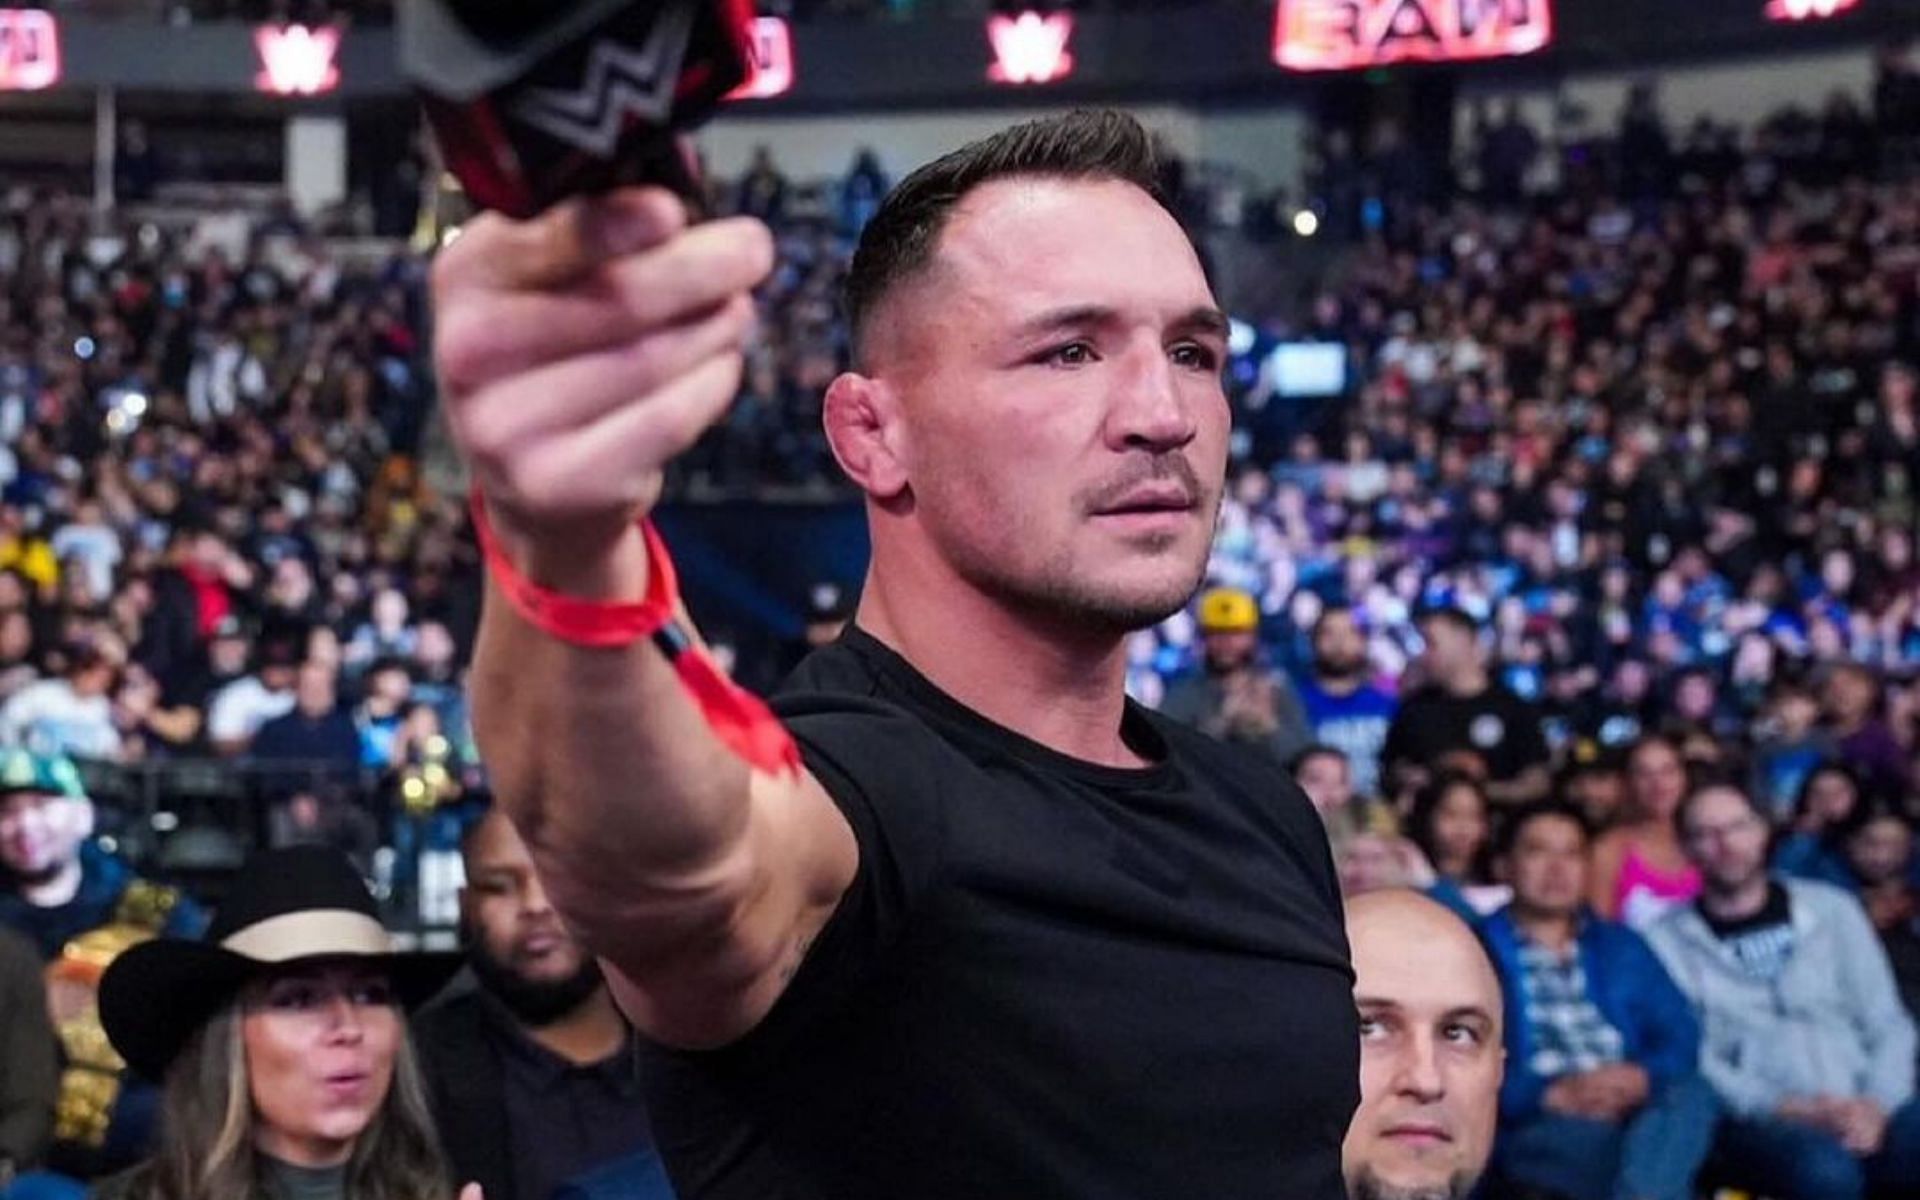 Michael Chandler speaks about his WWE appearance [Image credits: @mikechandlermma on Instagram]